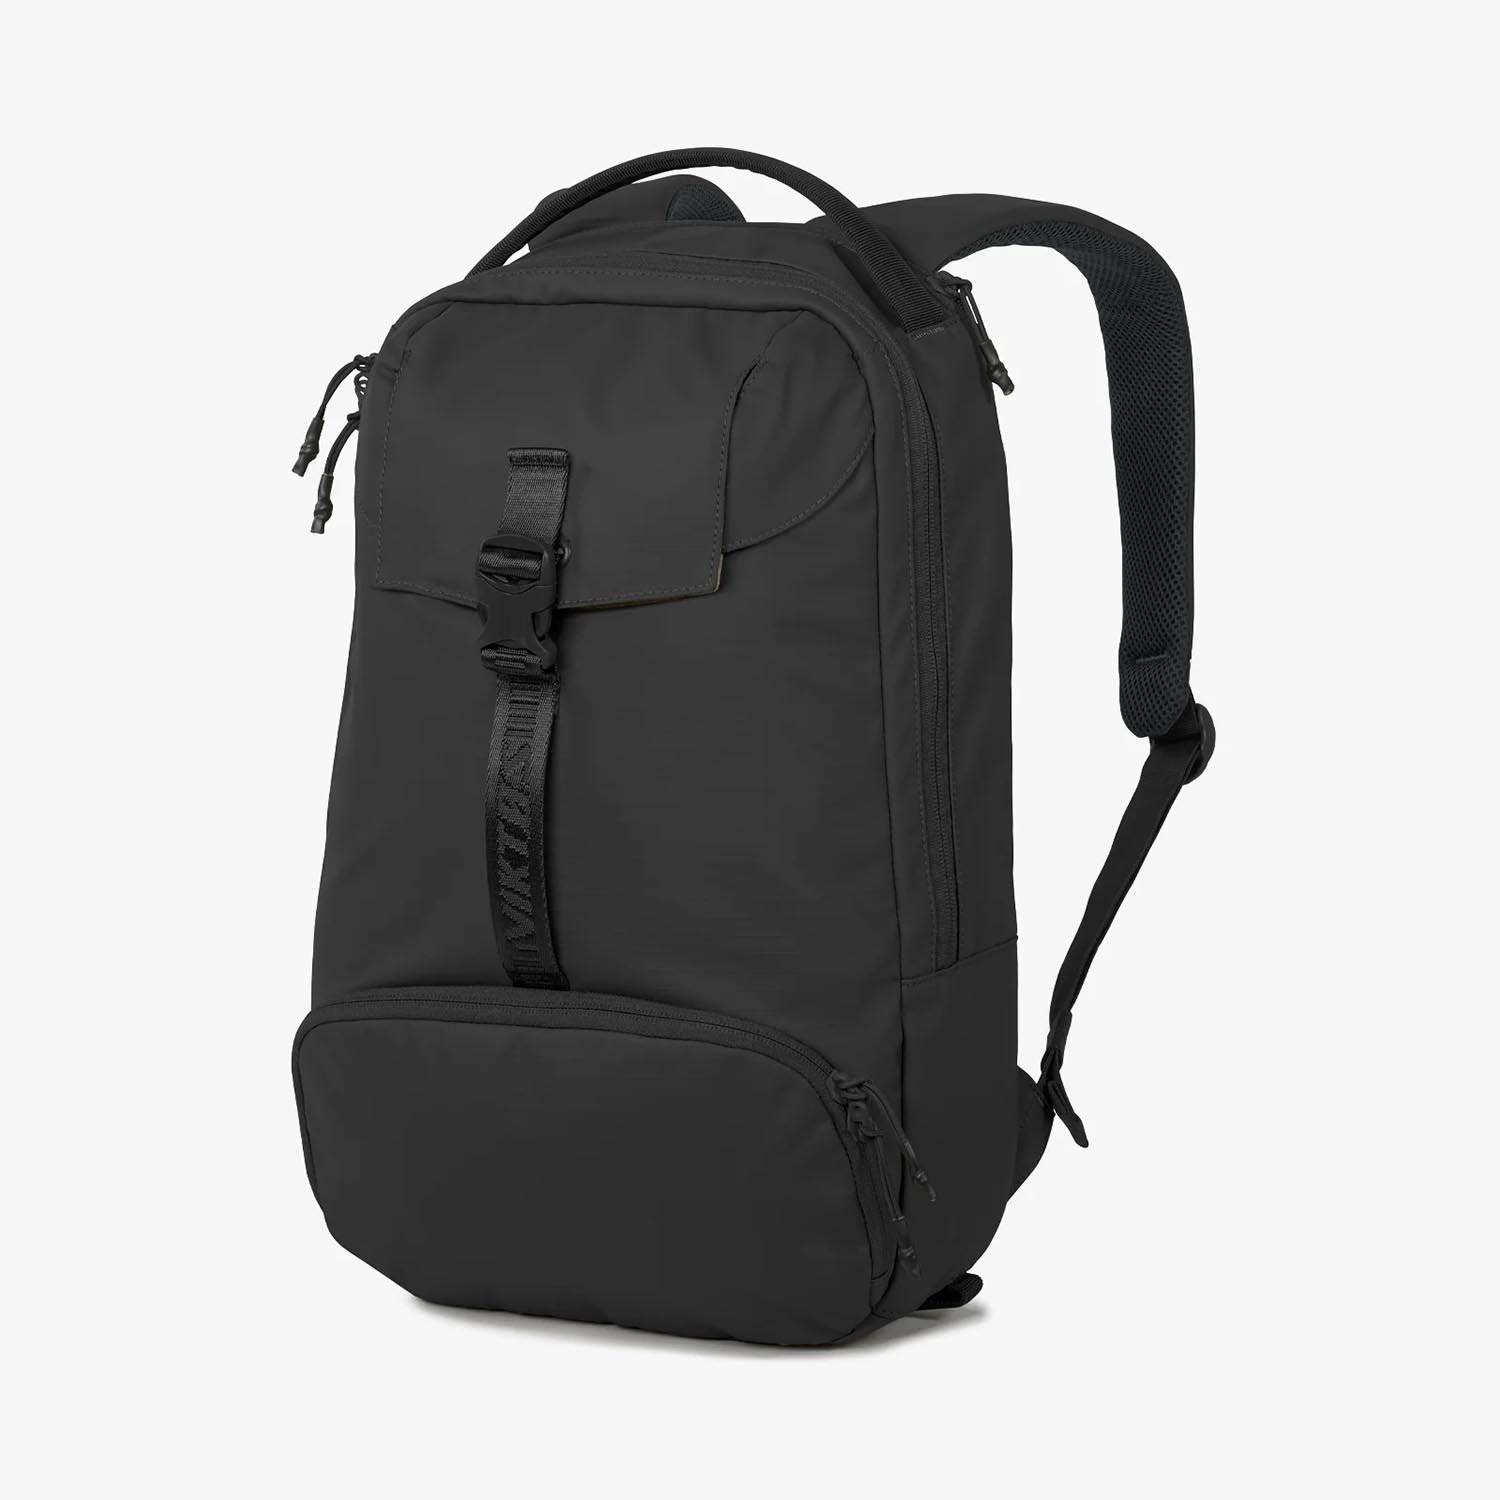 VIKTOS COUNTERACT 15 CCW BACKPACK